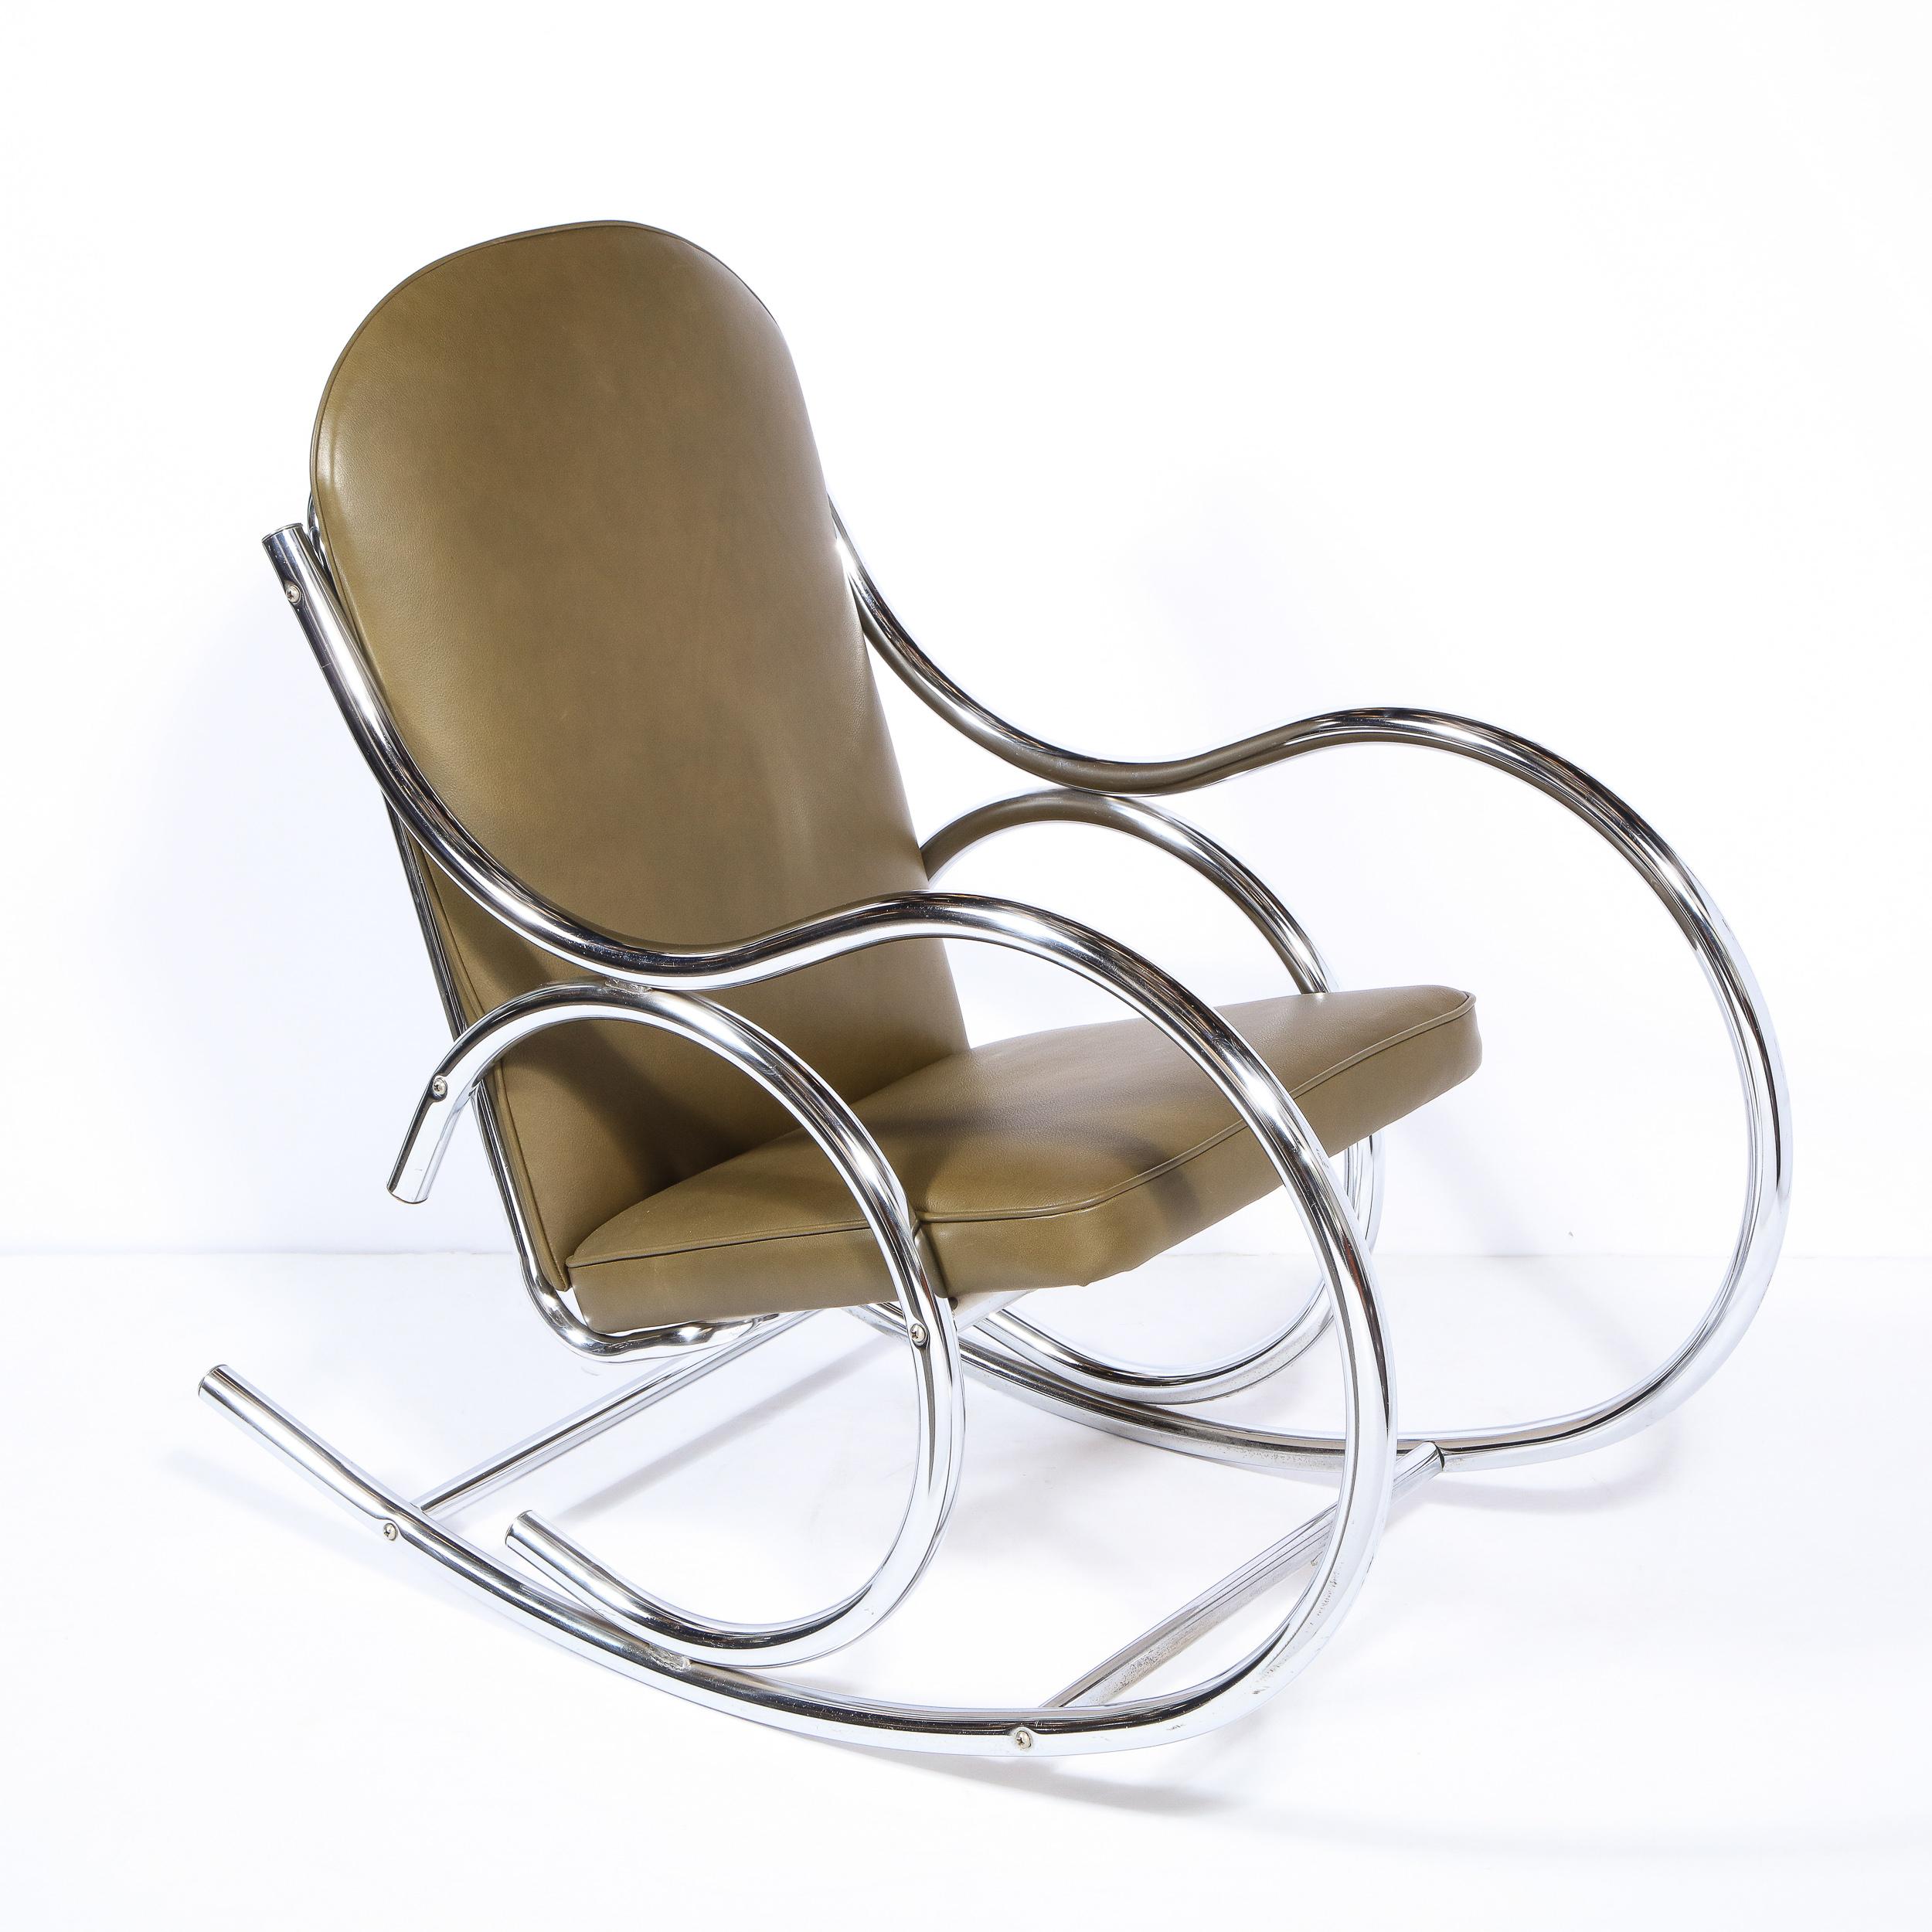 American Mid-Century Modern Polished Chrome Curvilinear Rocking Chair in Olive Leather